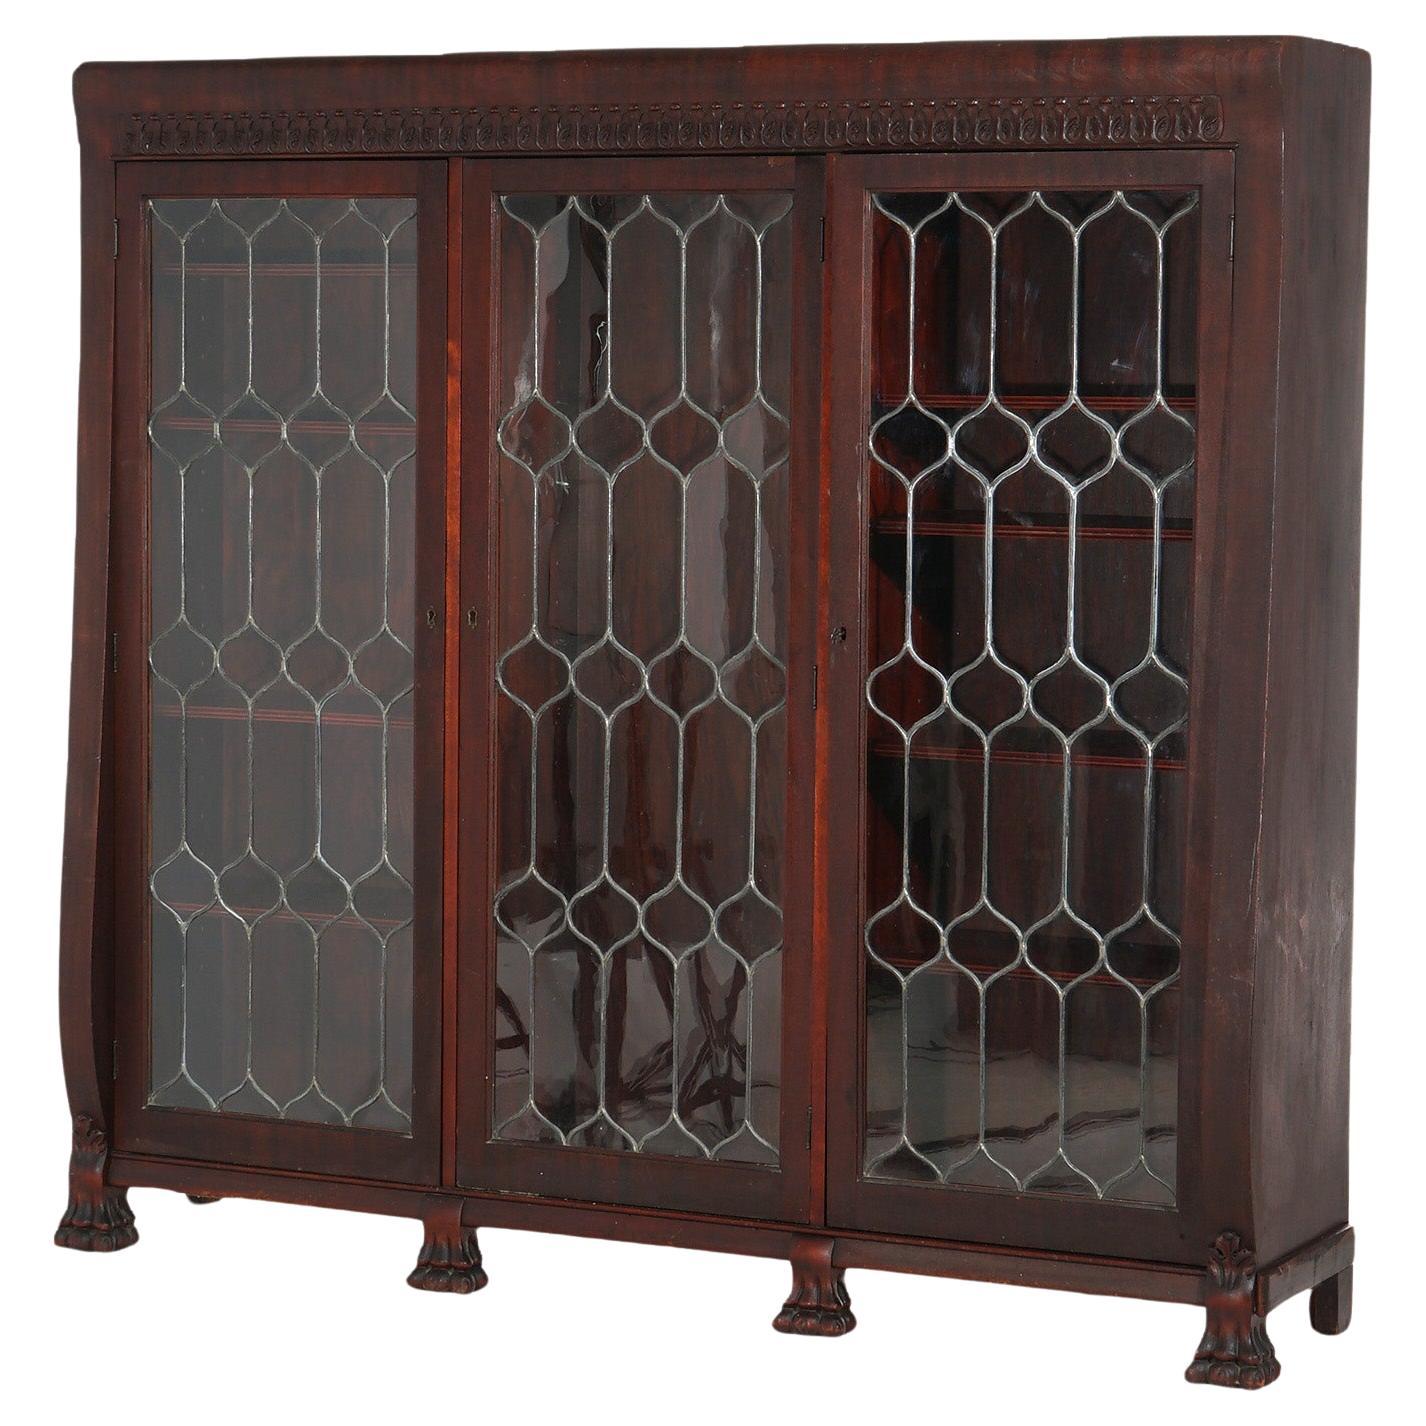 Antique Mahogany Triple Door Leaded Glass Bookcase with Carved Claw Feet C1900